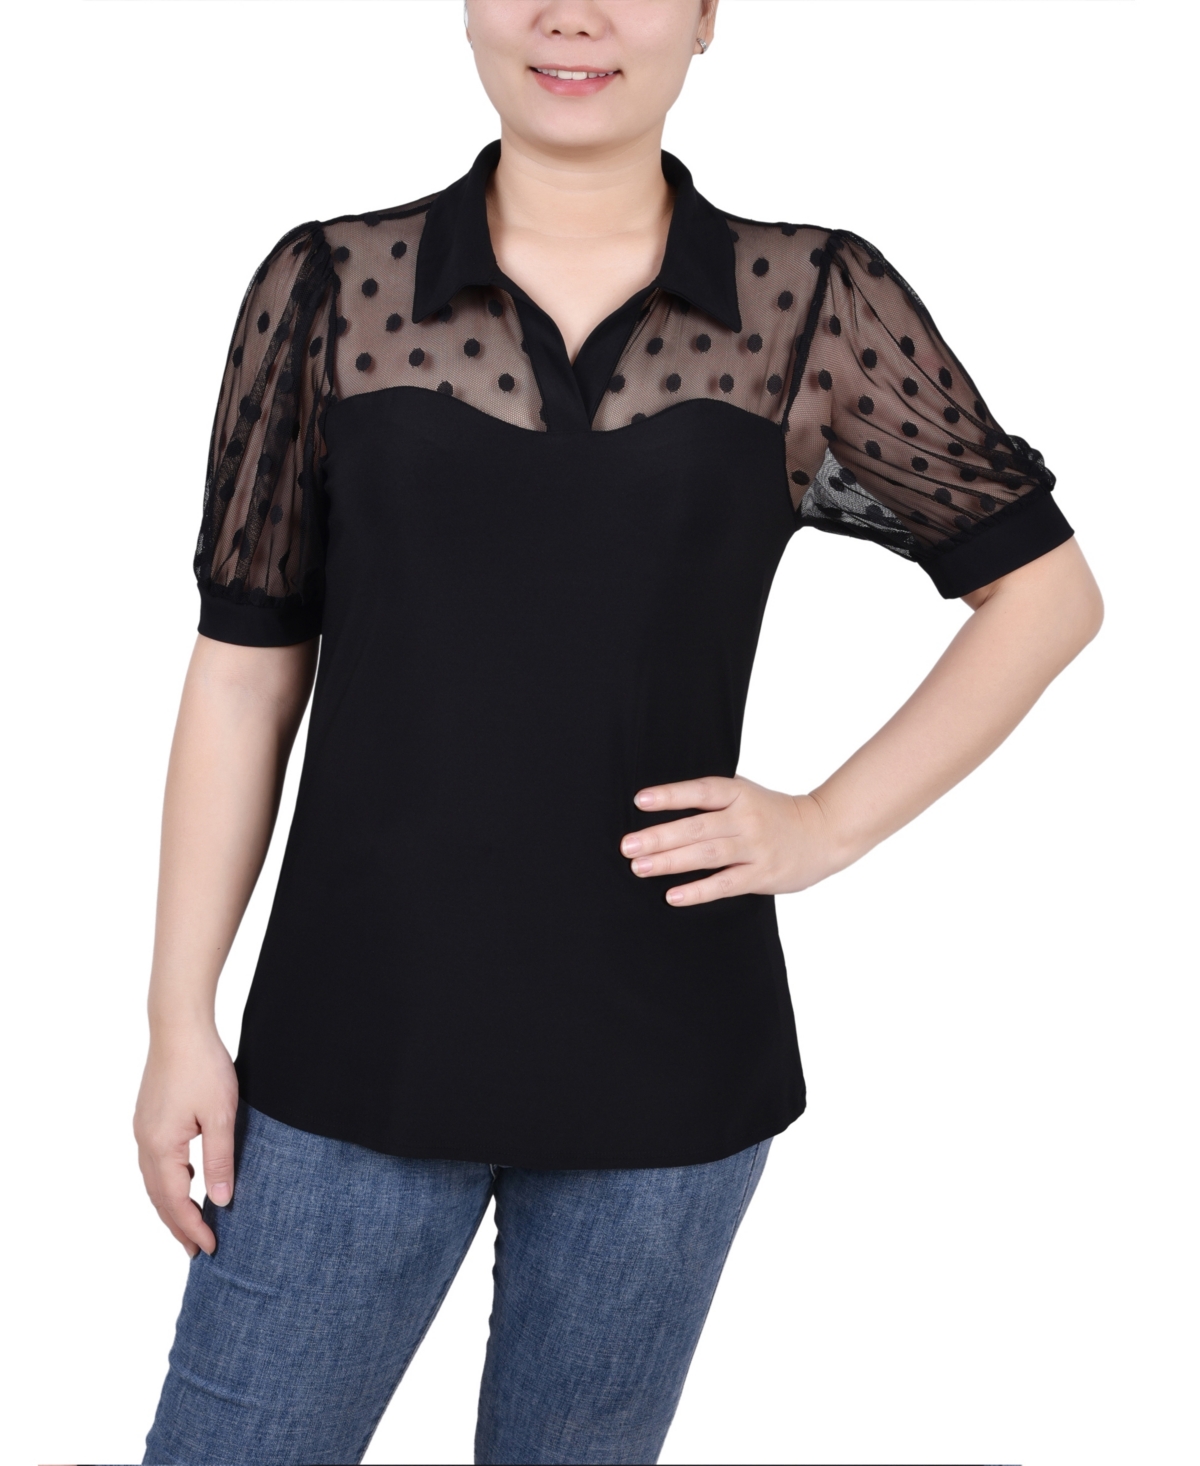 Women's Short Sleeve Top with Dotted Mesh - Black